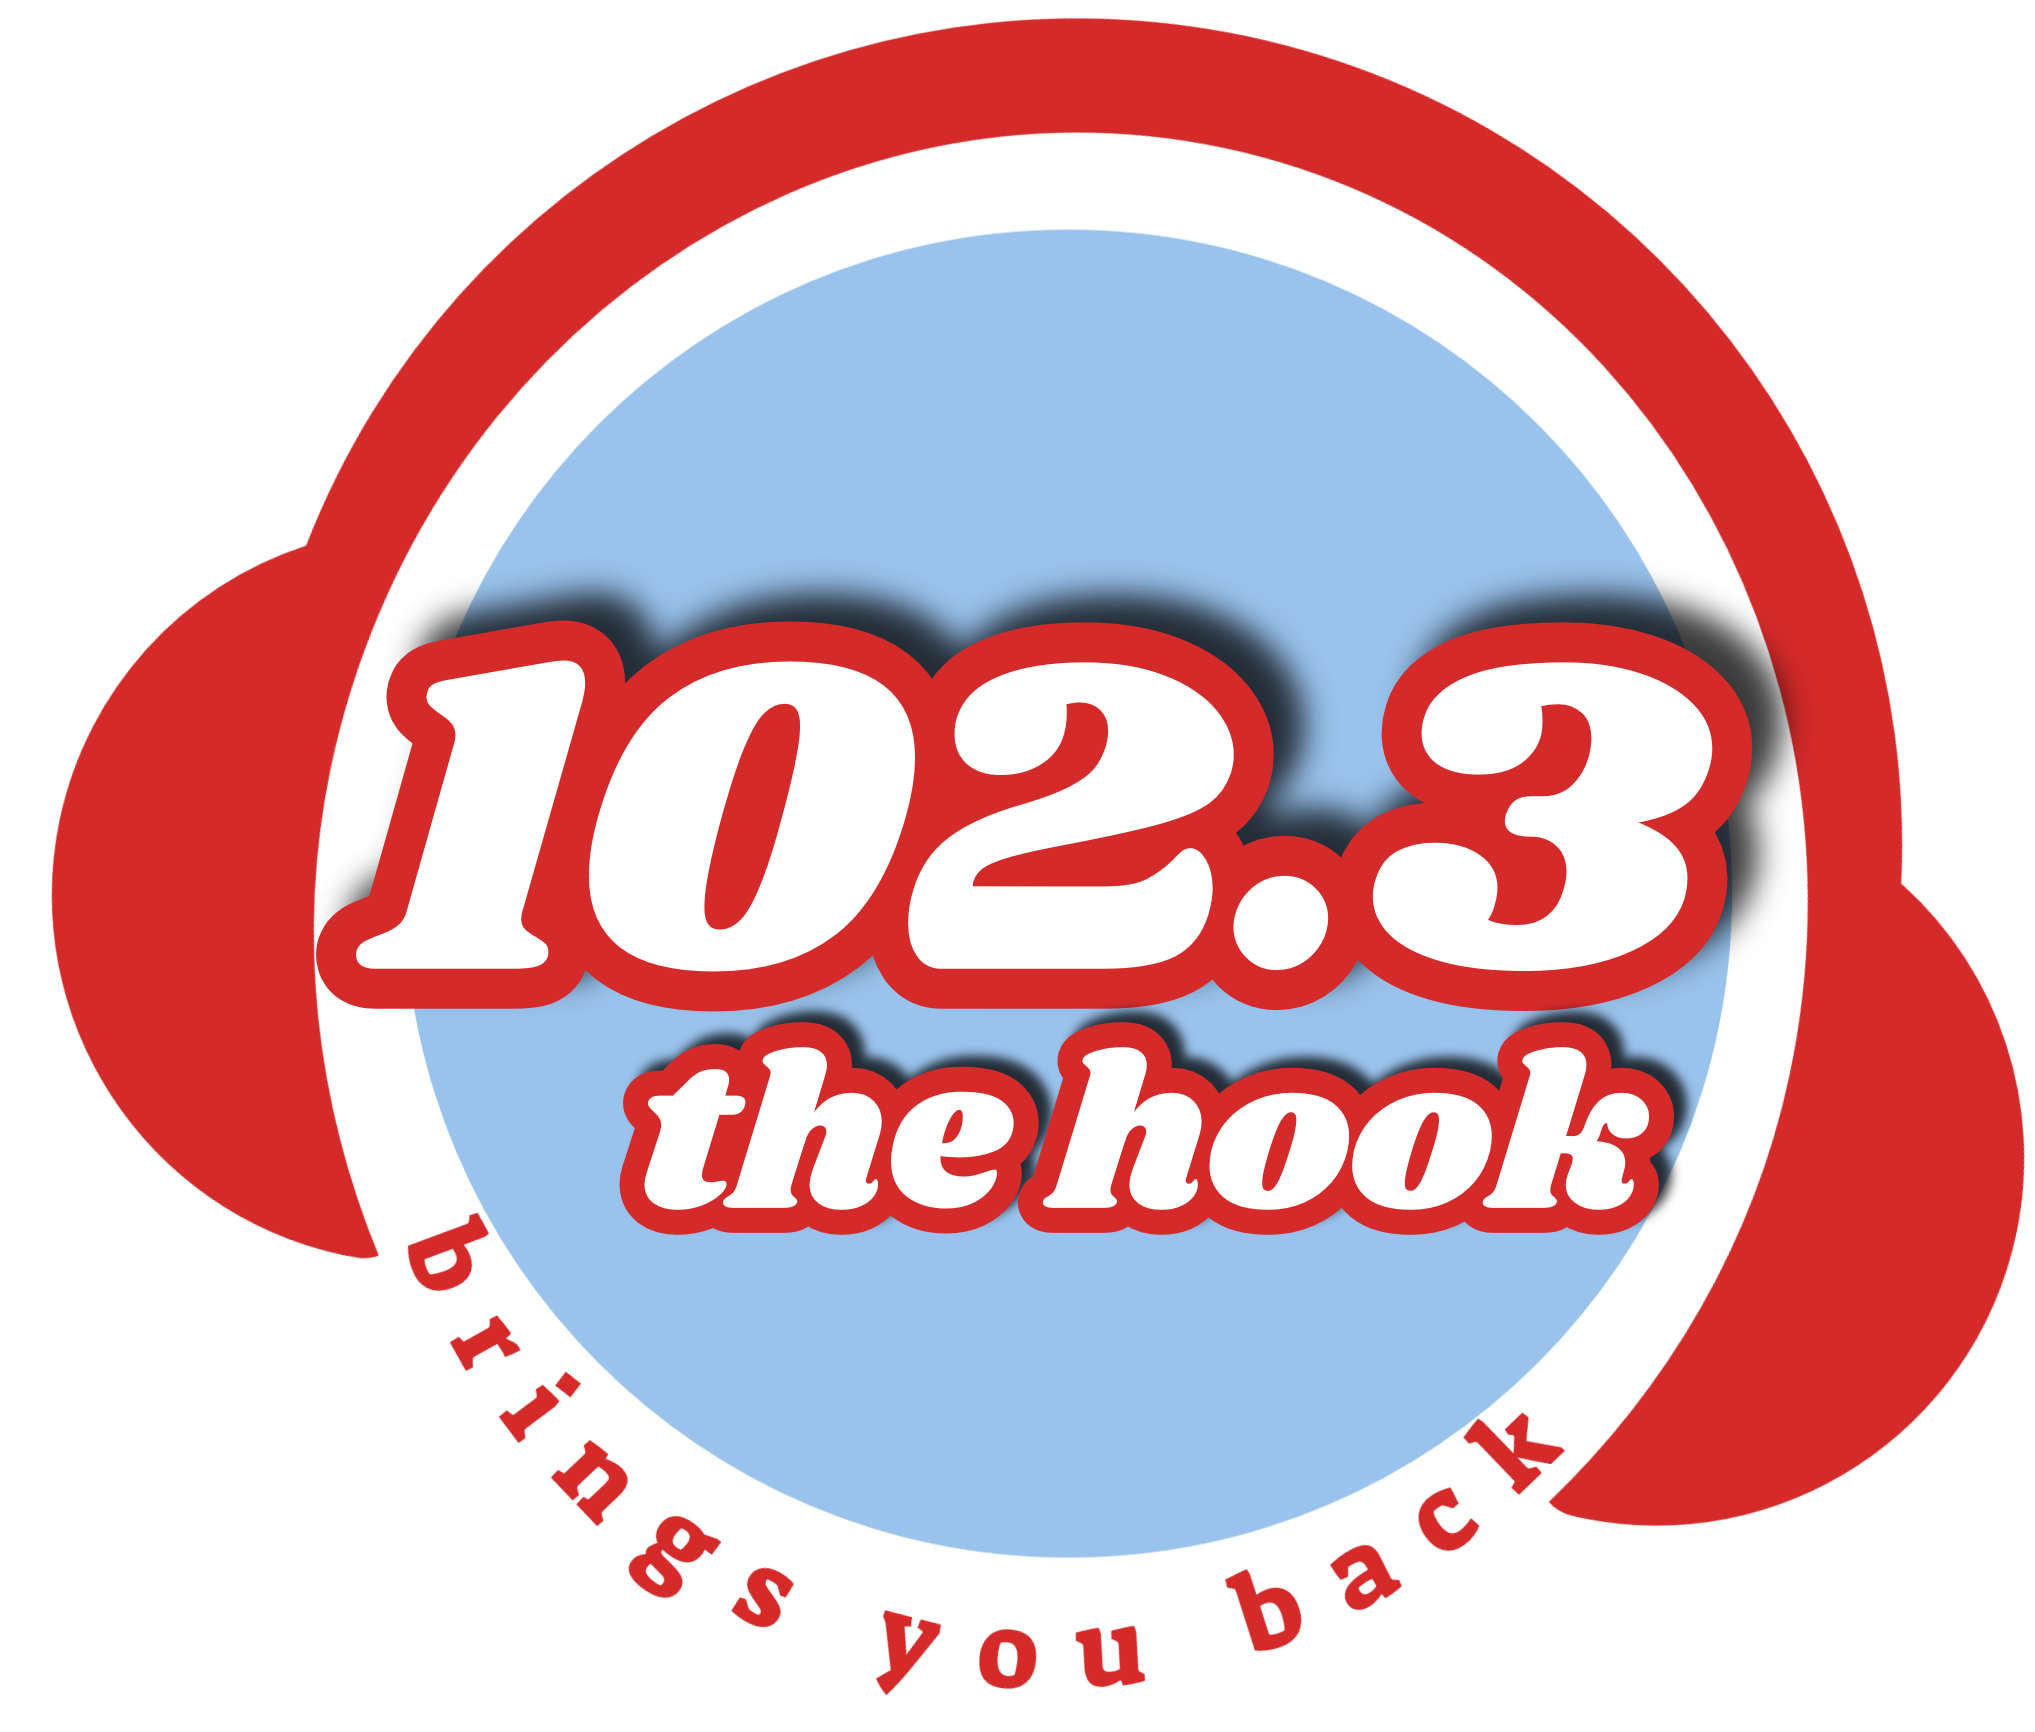 102.3 The Hook